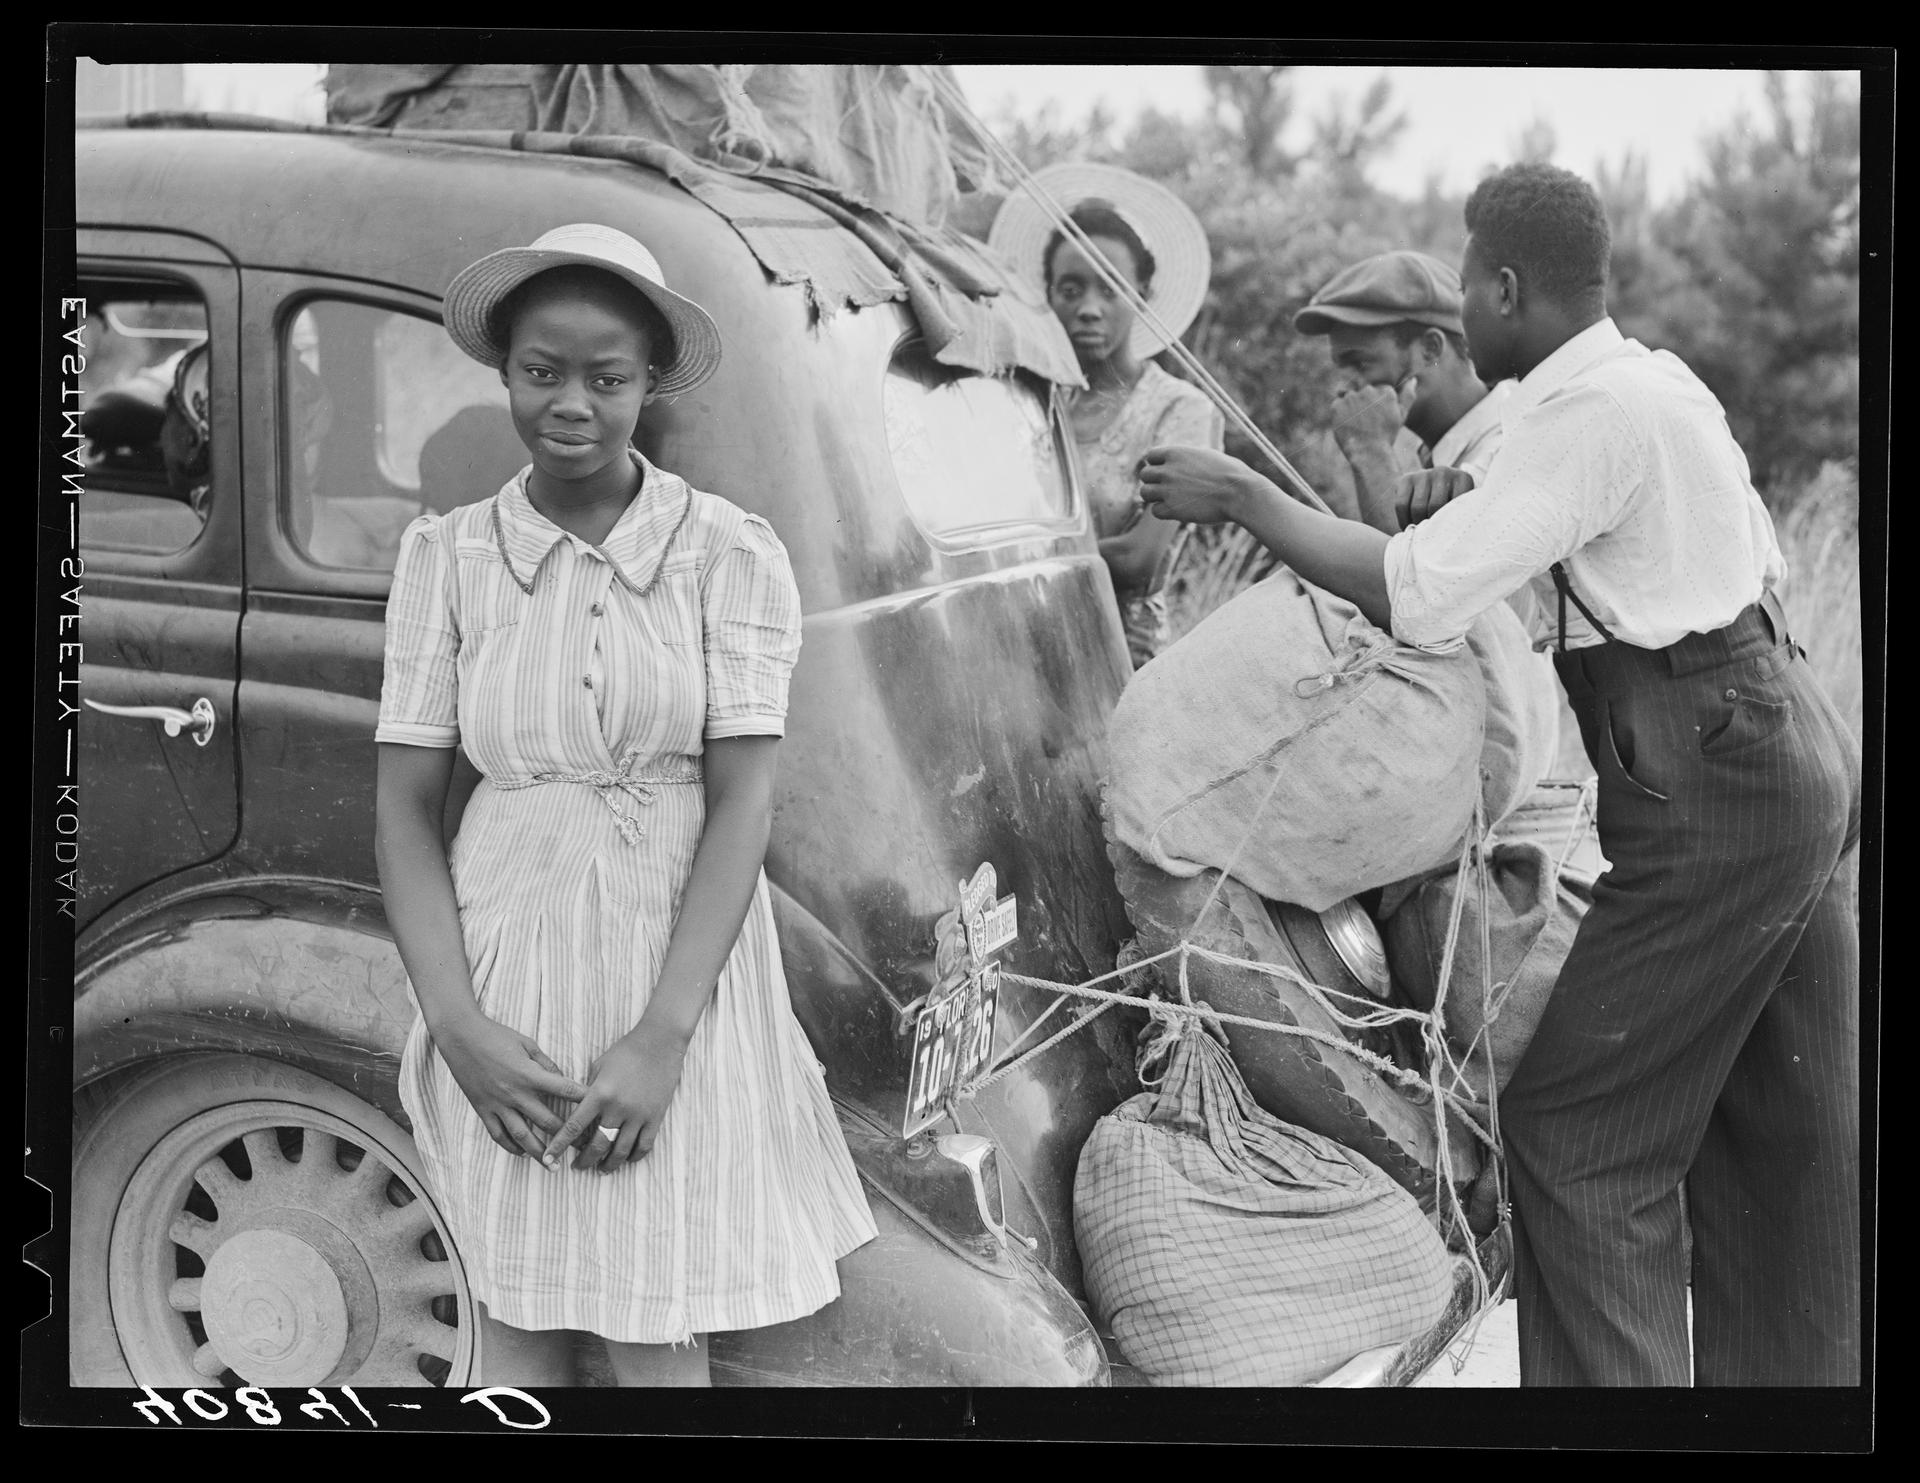 A family is seen tying sacks of potatoes to a car.